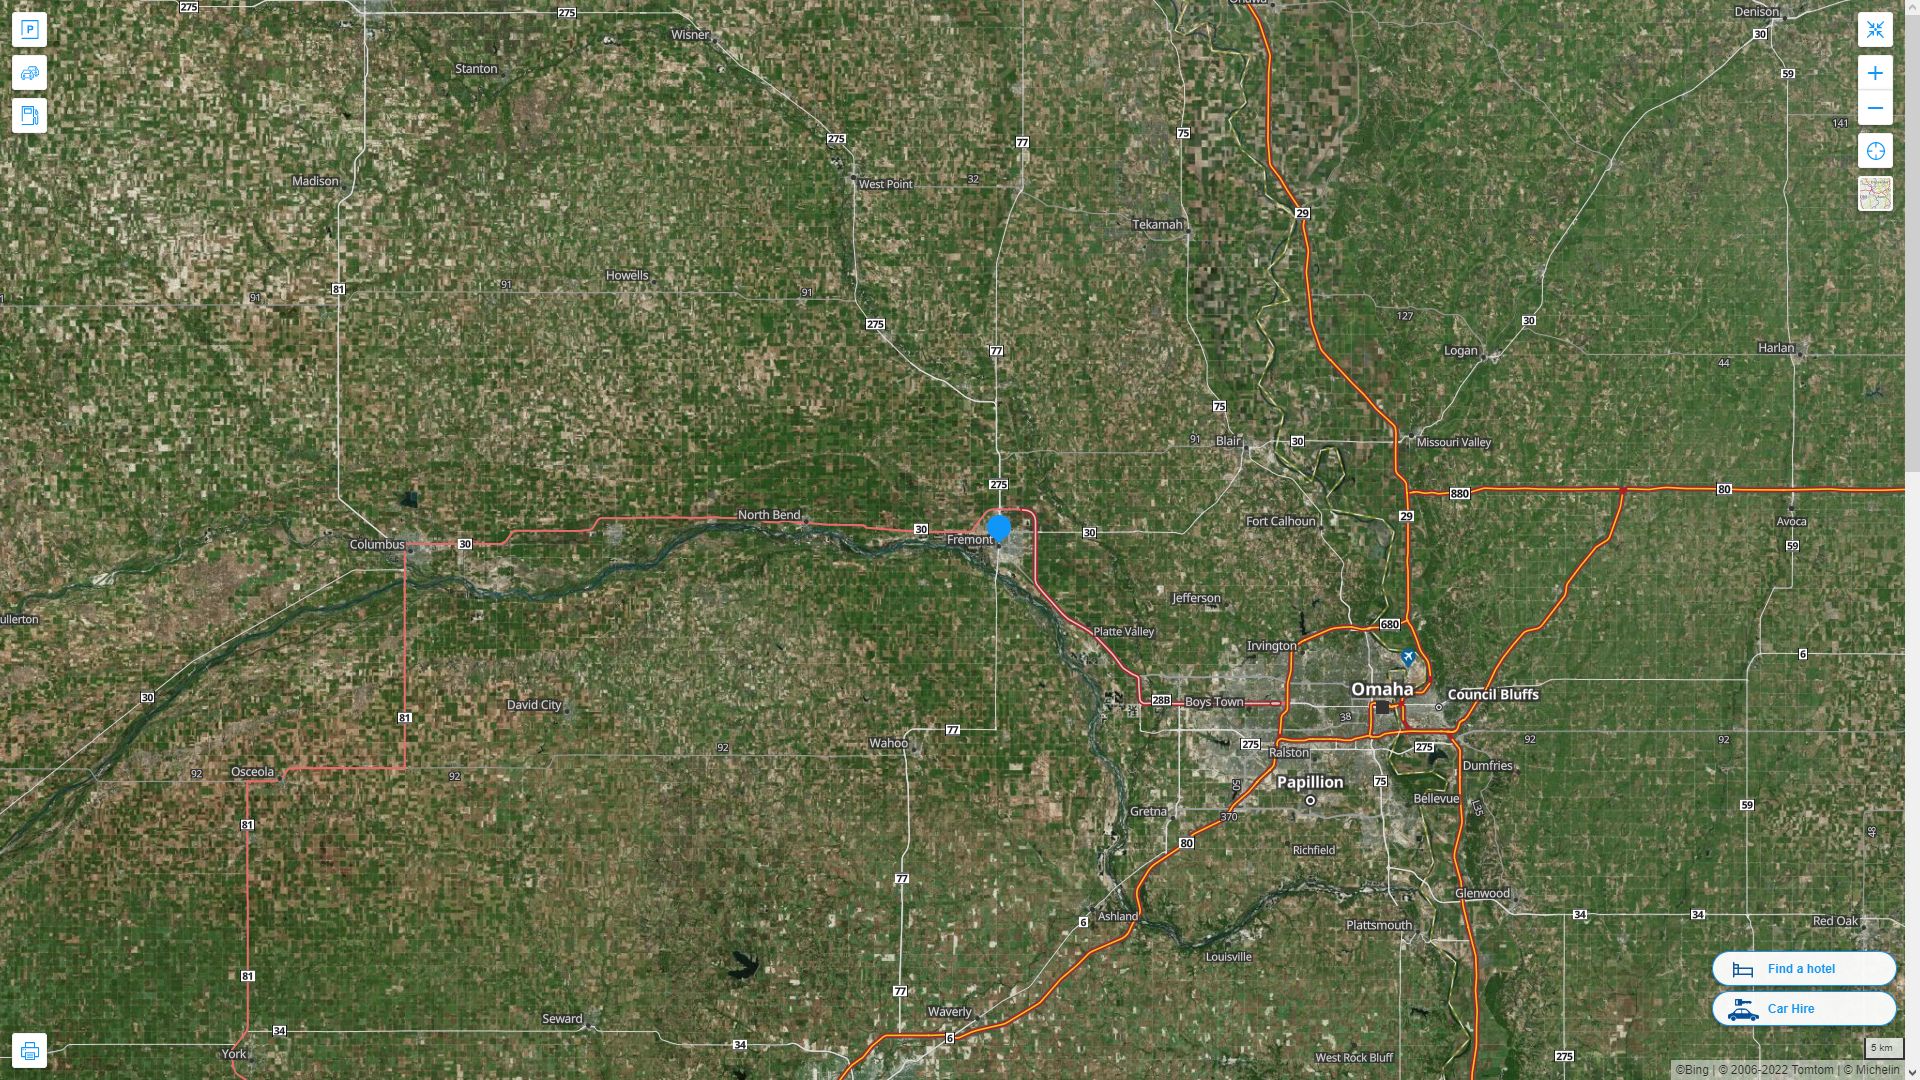 Fremont Nebraska Highway and Road Map with Satellite View